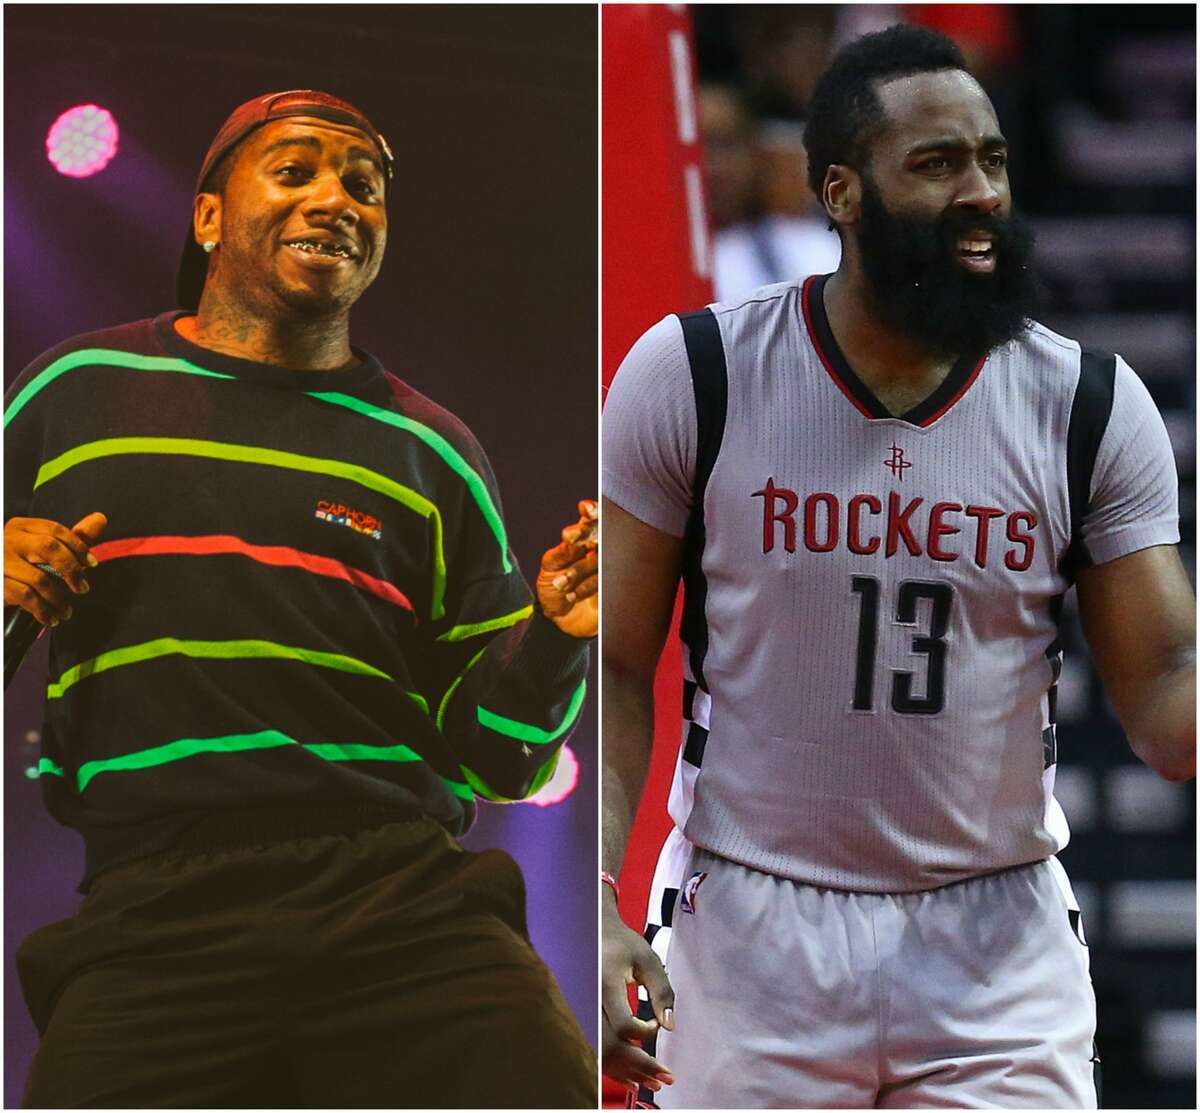 How James Harden Can End the Lil B Curse